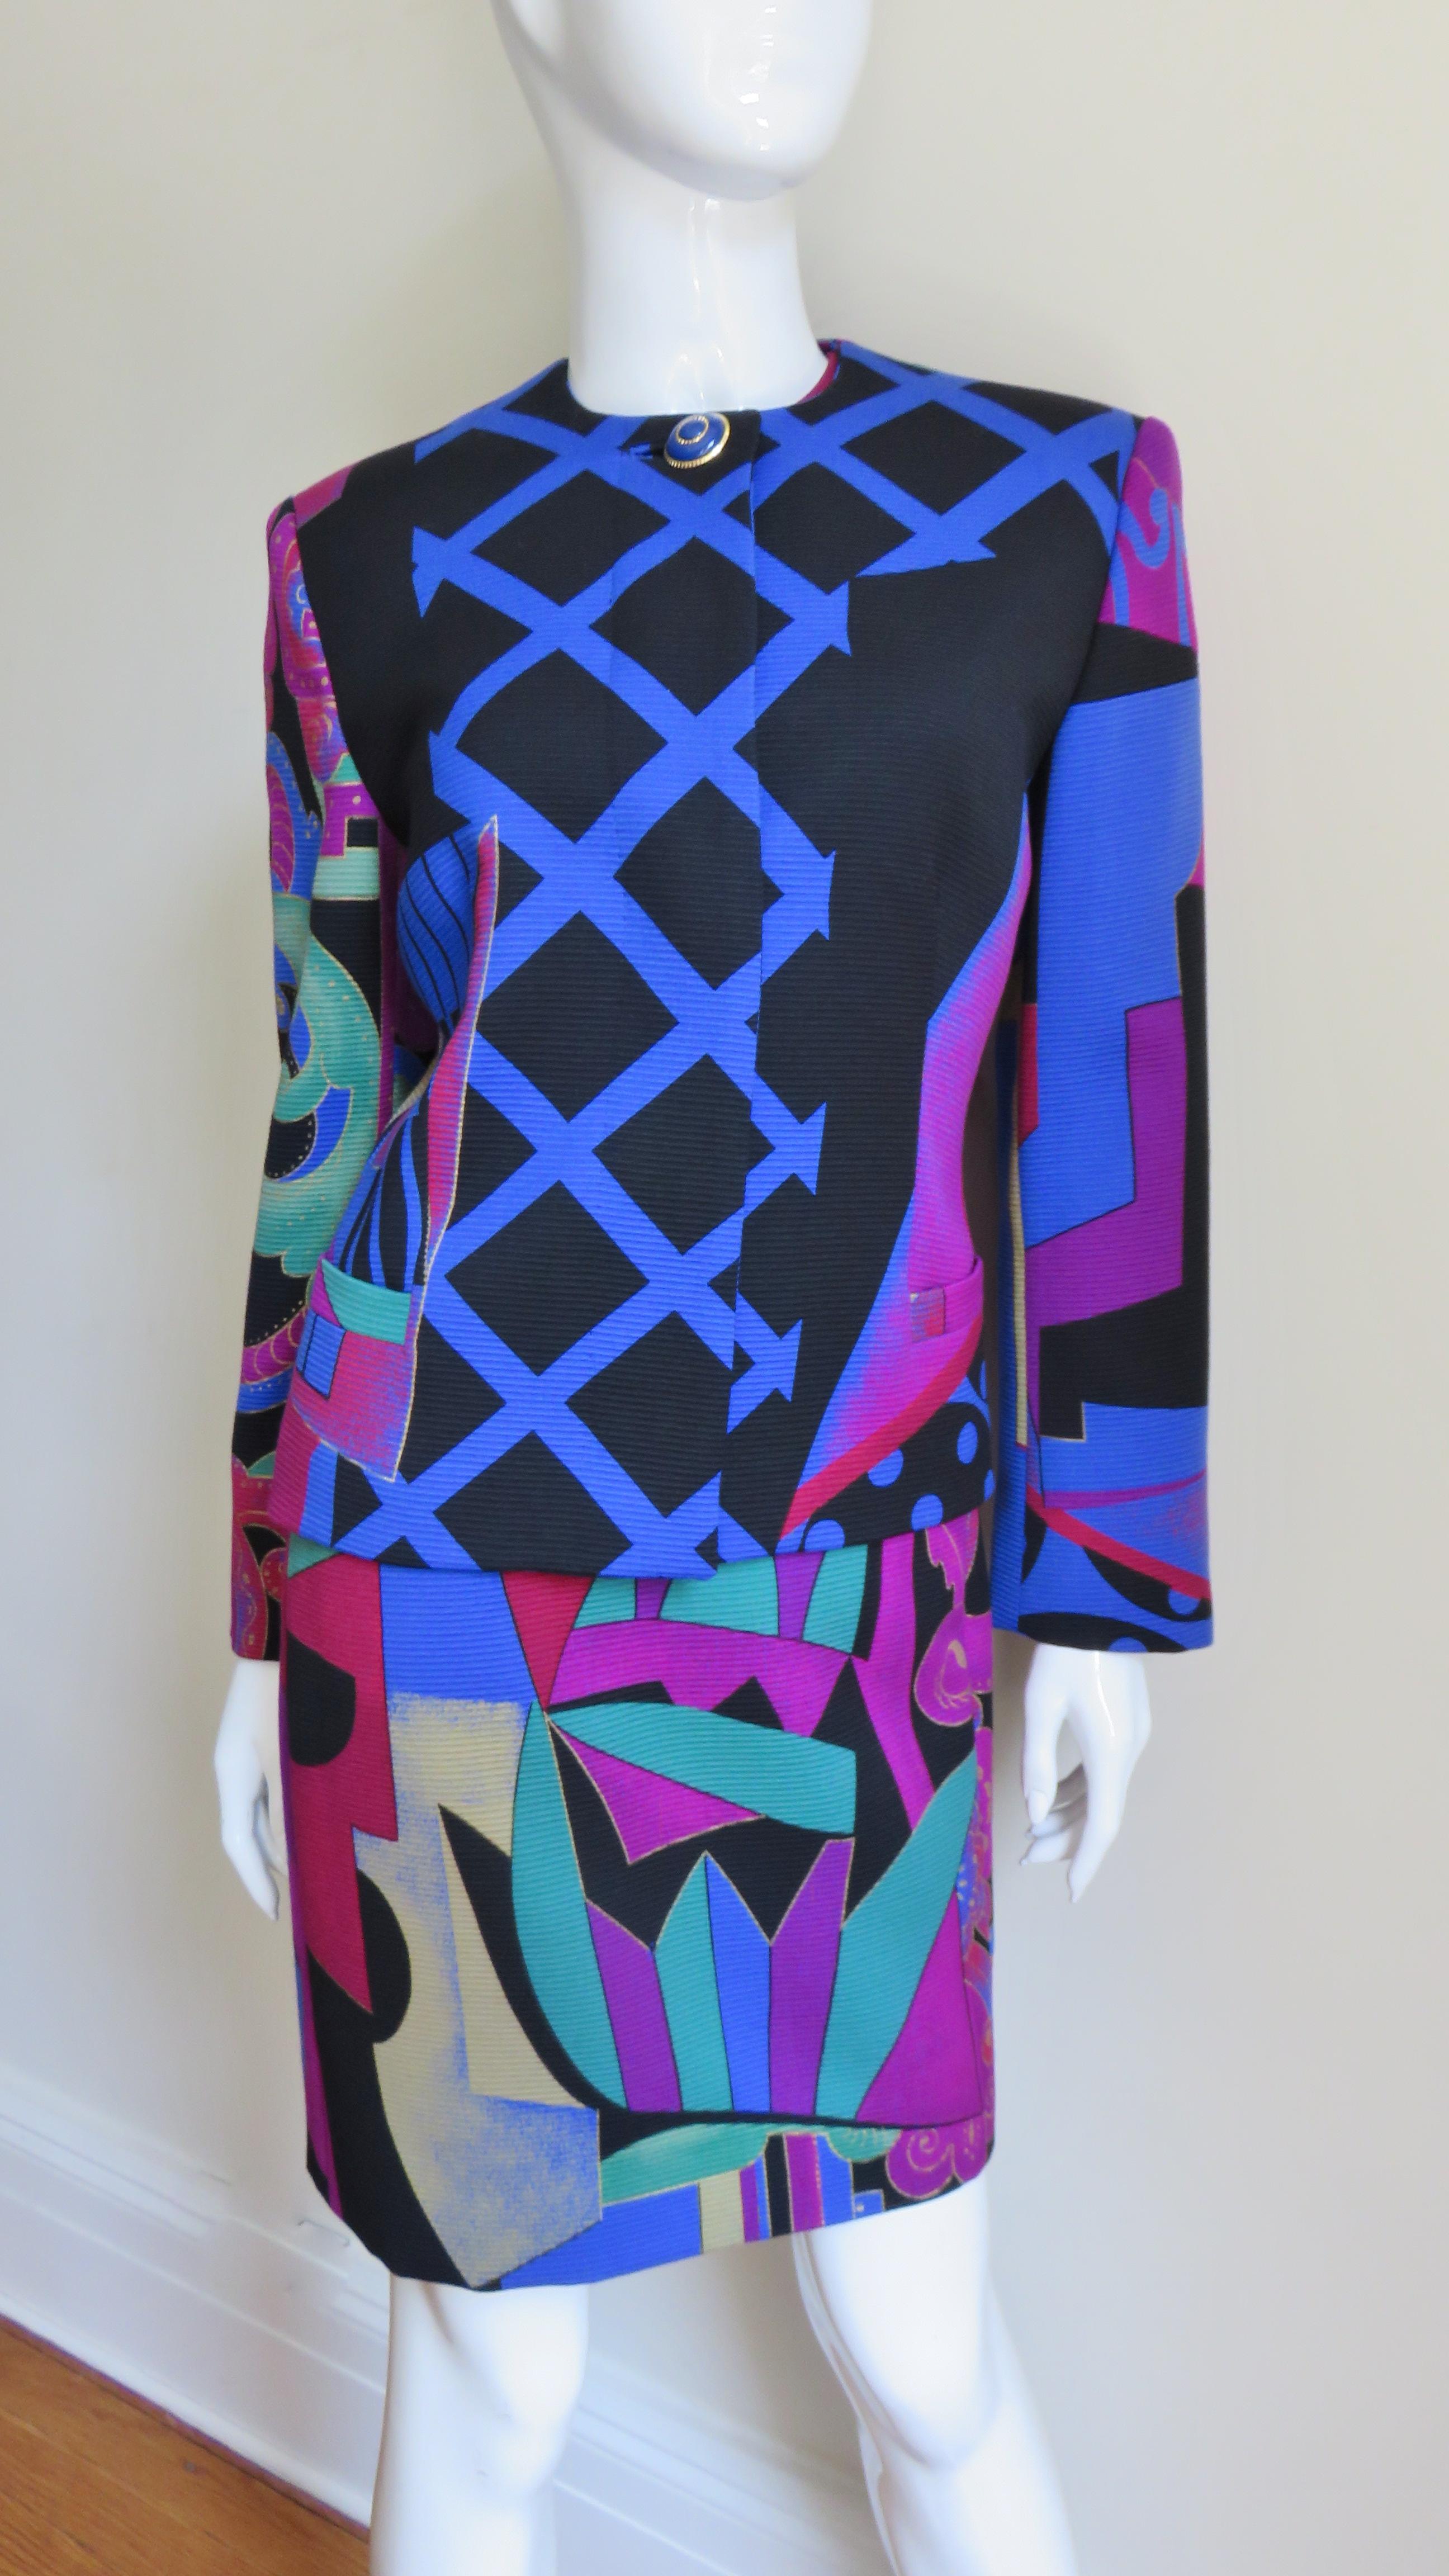 Gianni Versace Graffiti Dress and Jacket A/W 1991 For Sale 1